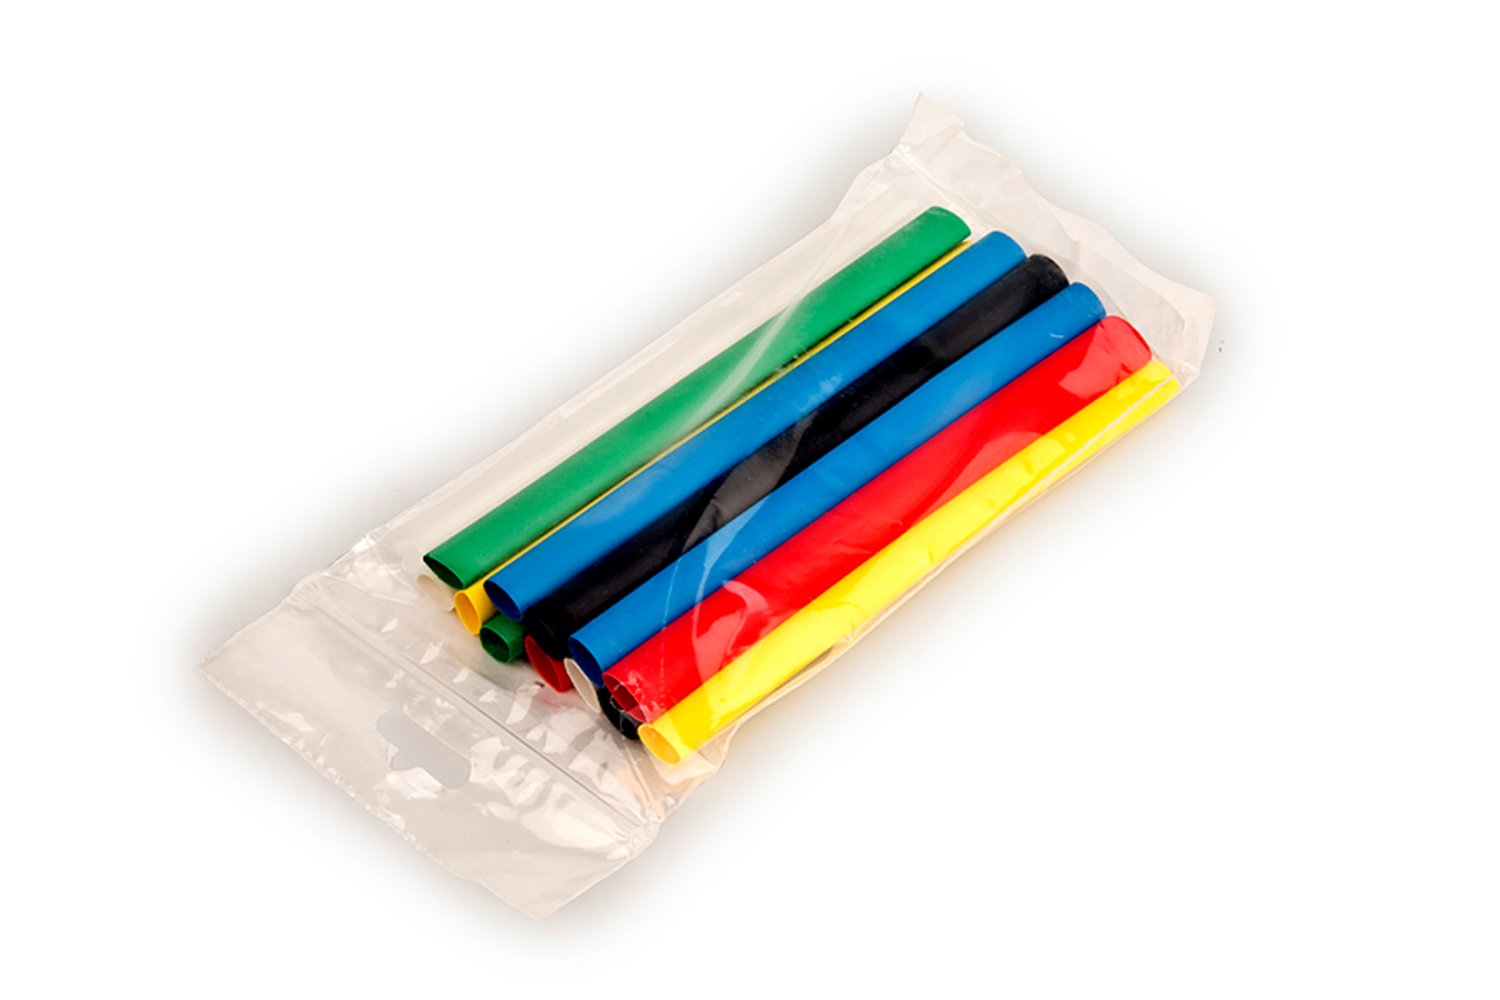 7000132600 - 3M Heat Shrink Tubing Assortment Pack FP-301-1/8-Assort: 6 in length
pieces, 4 each of 7 colors, 10/case